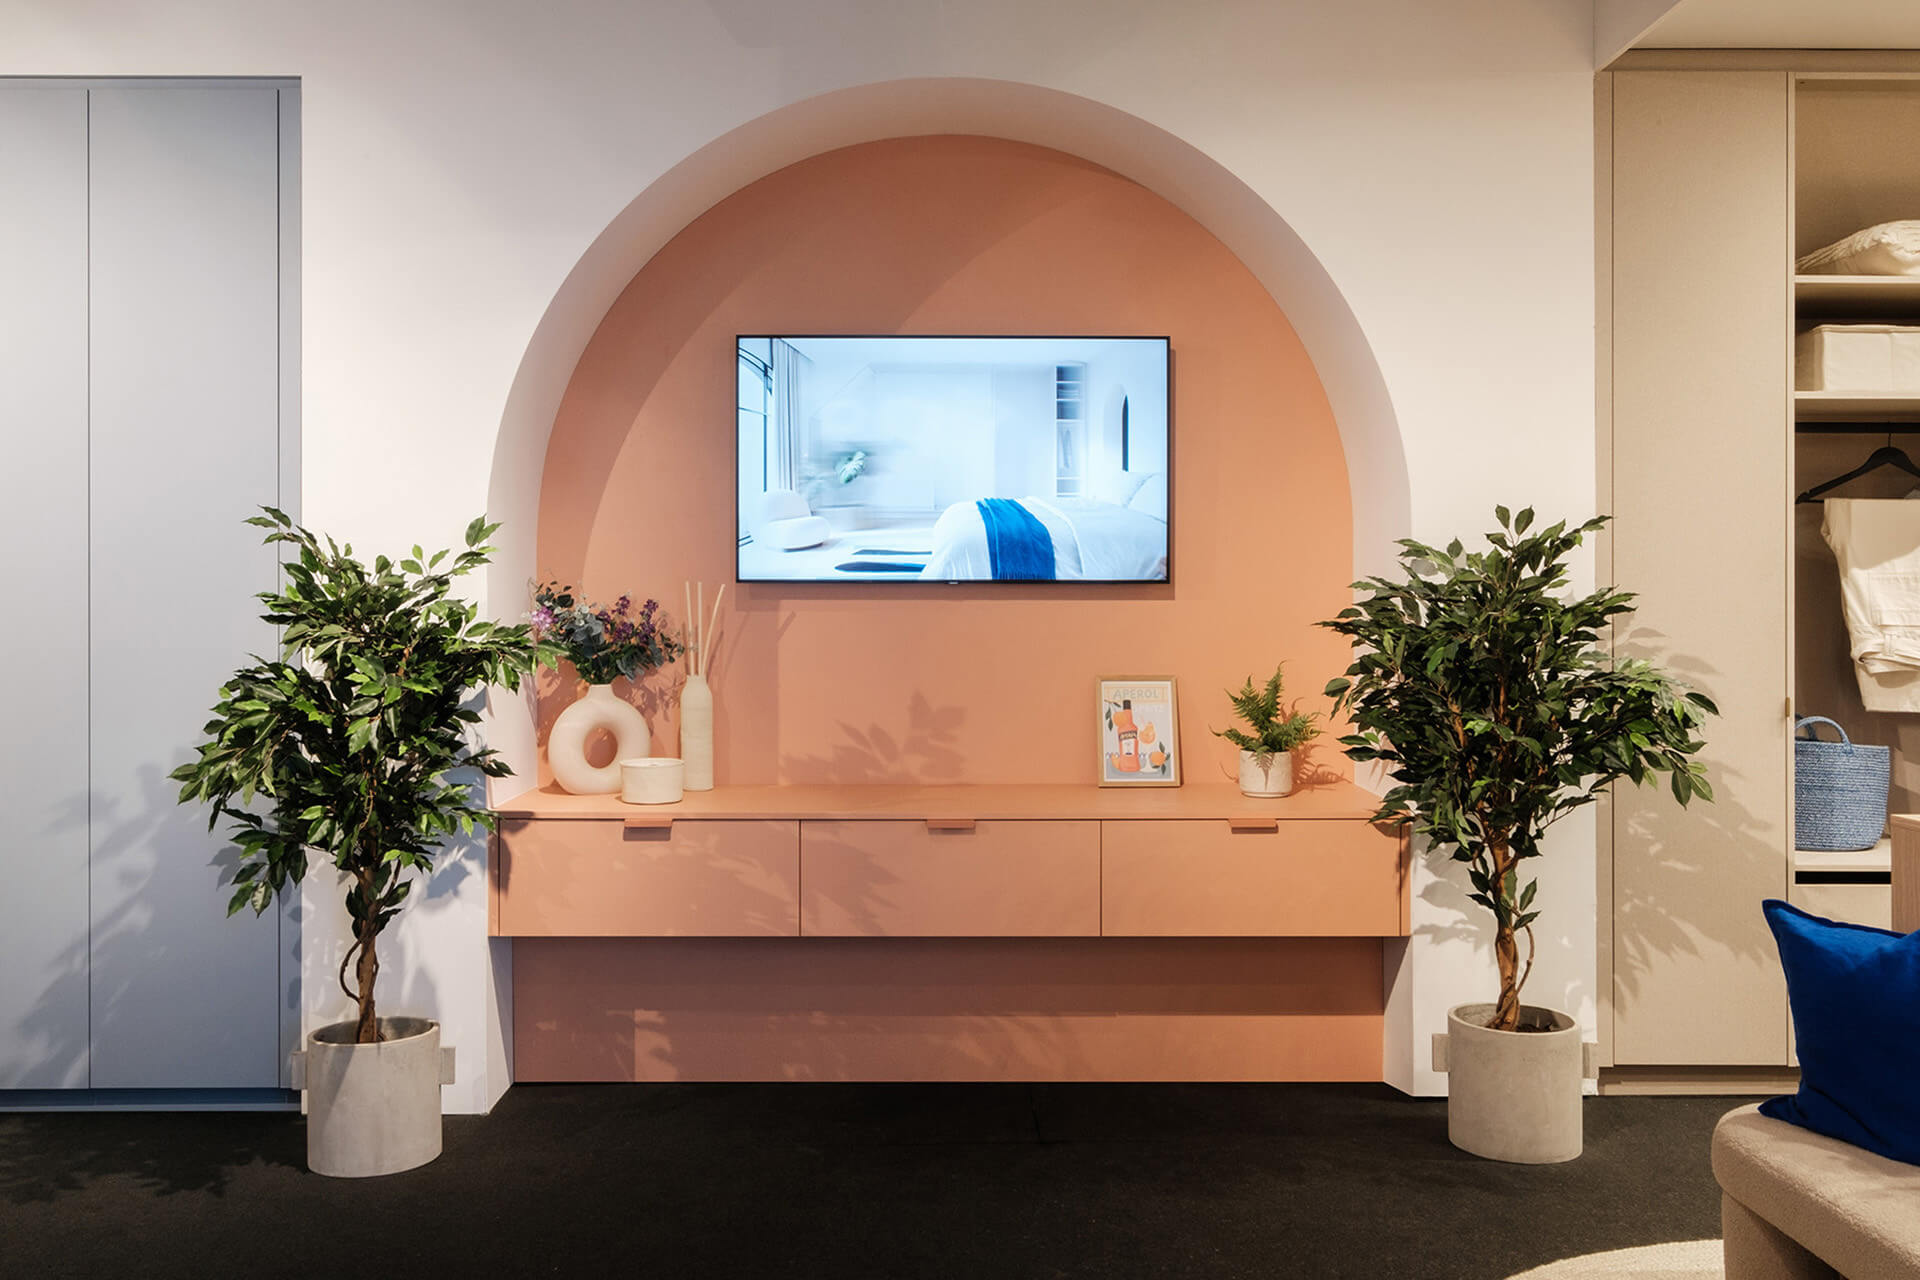 Made-to-measure suspended TV unit in a pink colour, presented at the BIS exhibition stand